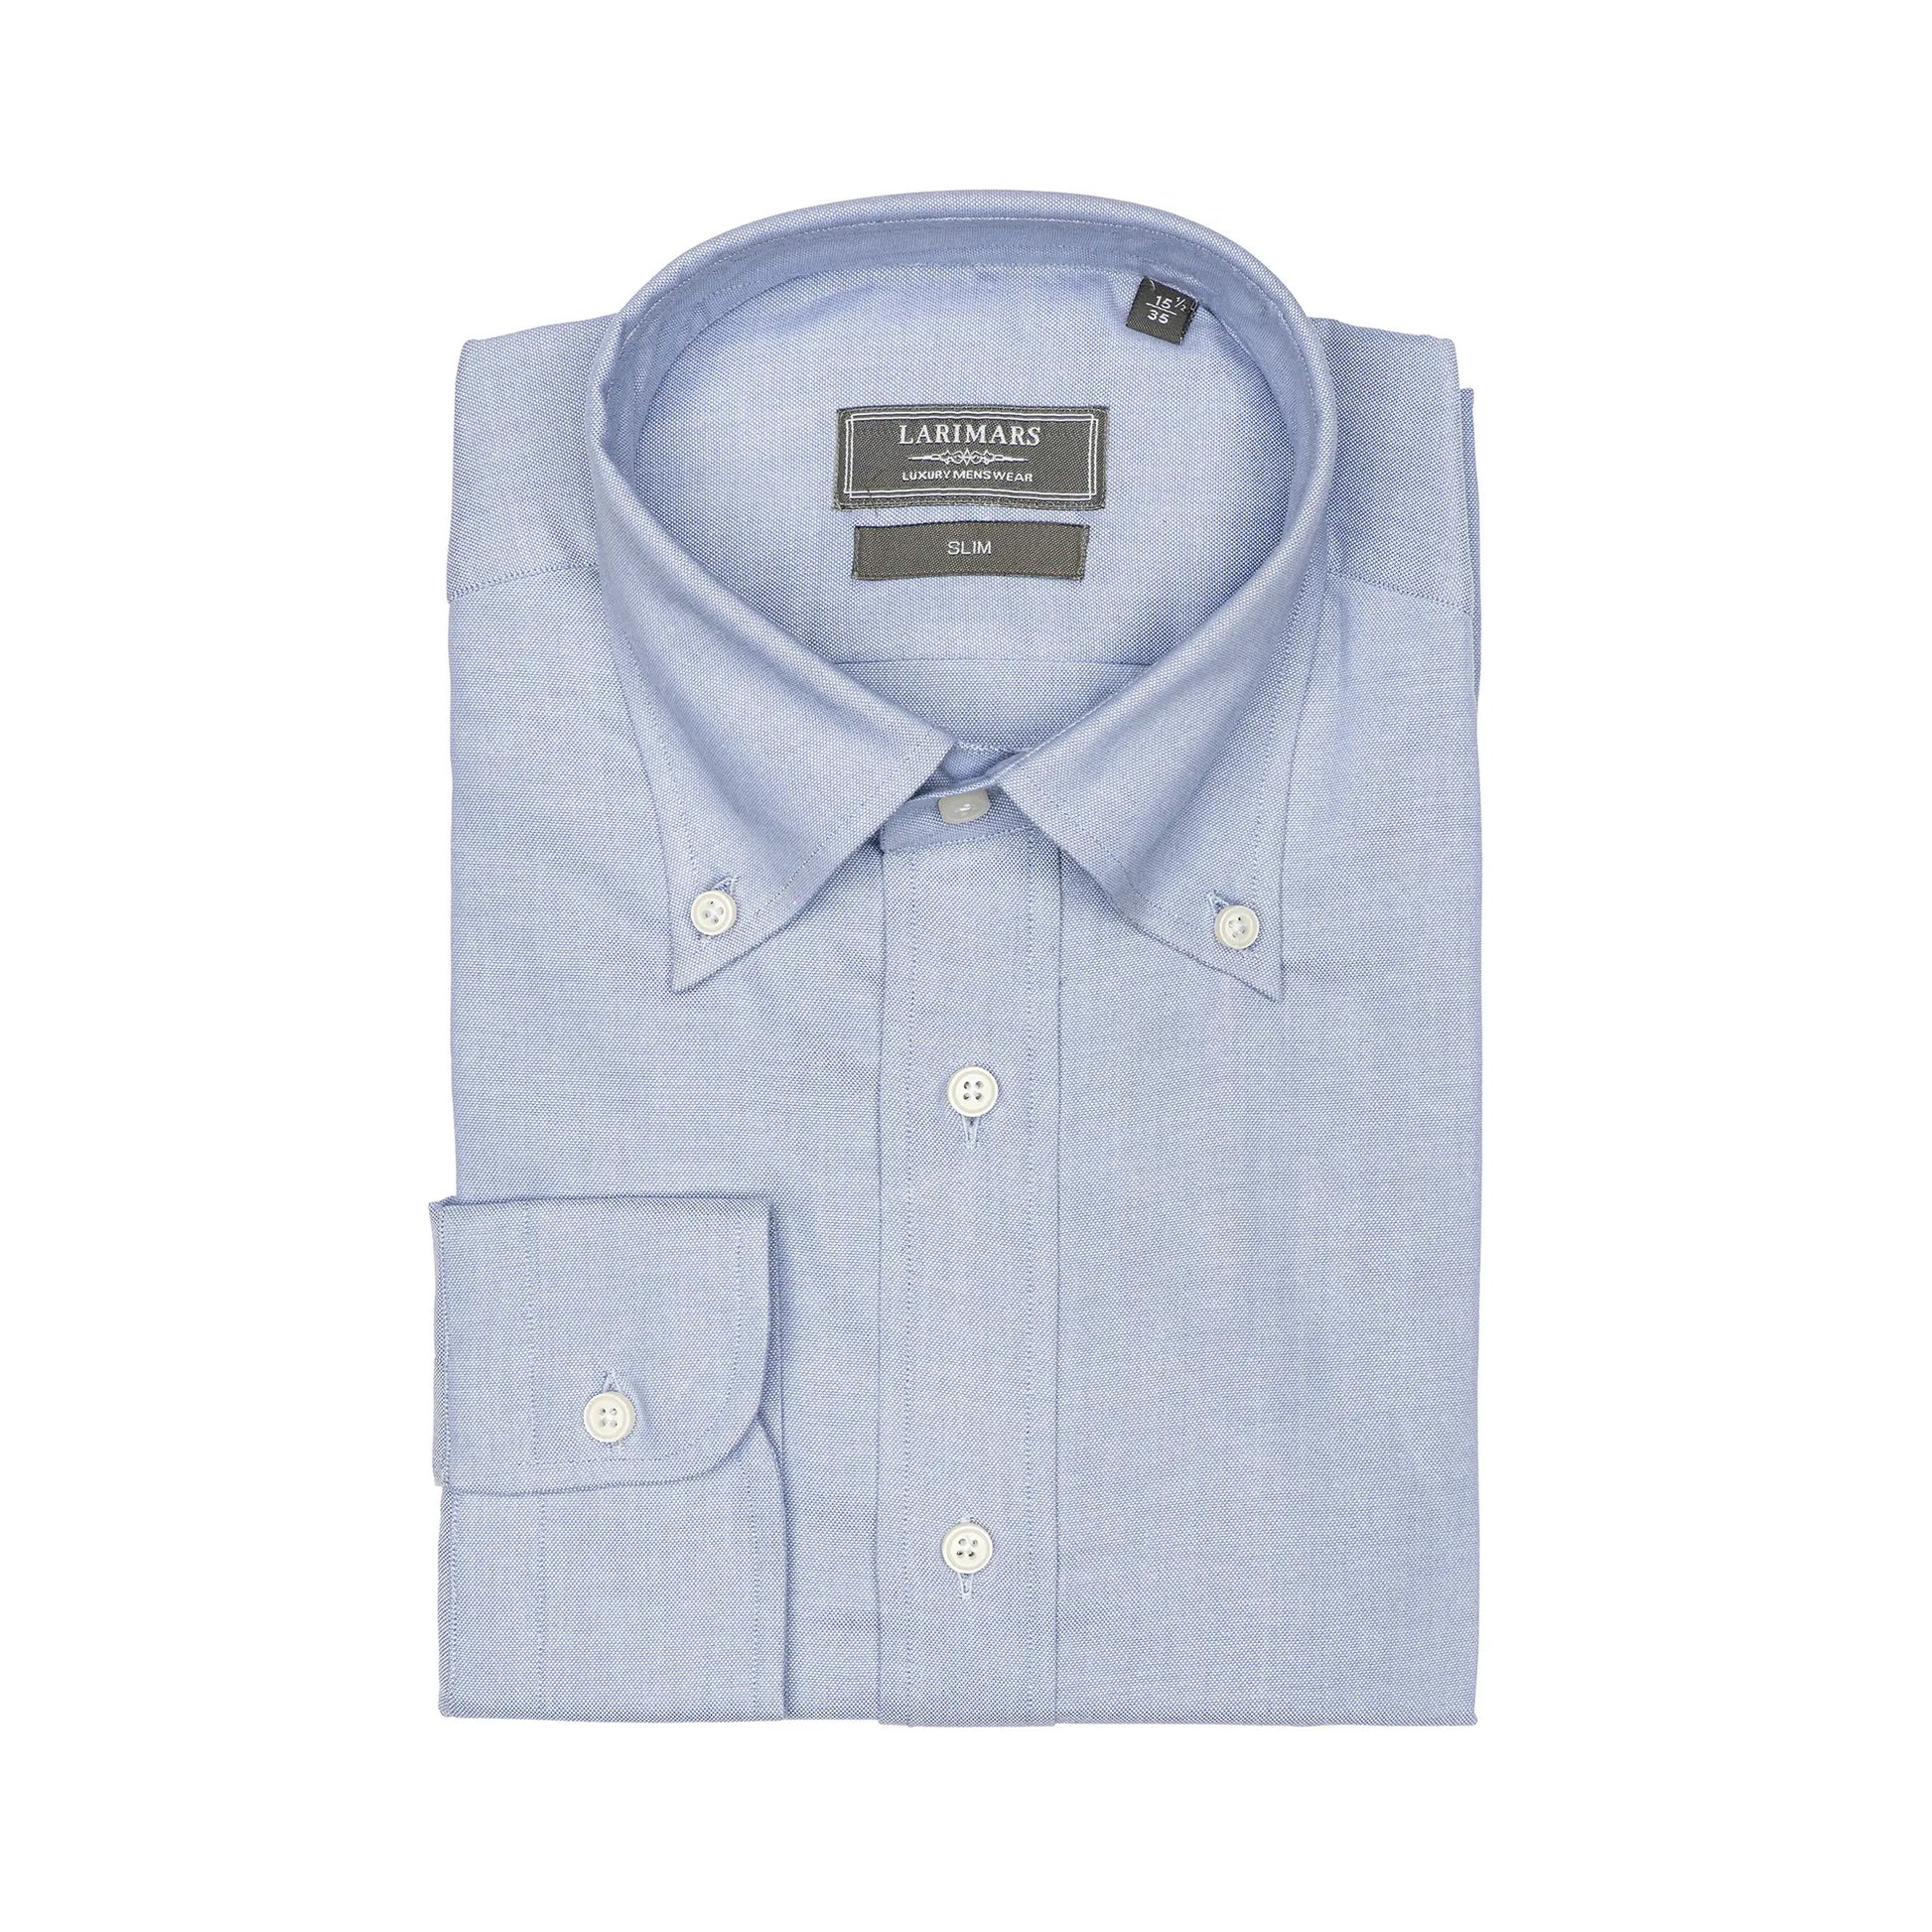 Solid Medium Blue | Light Weight Oxford - Larimars Clothing Men's Formal and casual wear shirts